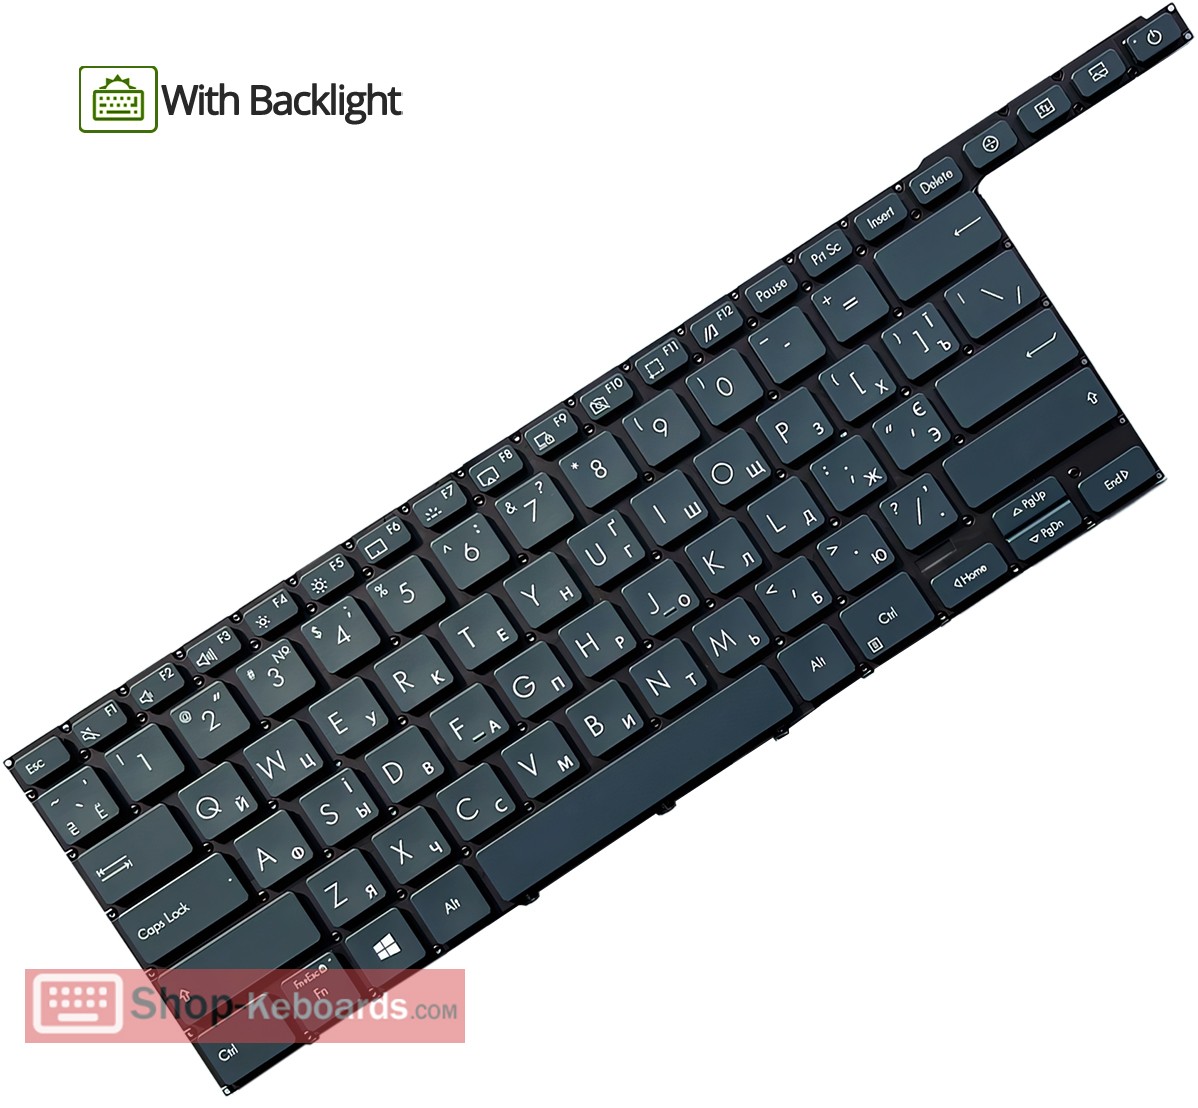 Asus 0KNB0-6823WB00  Keyboard replacement